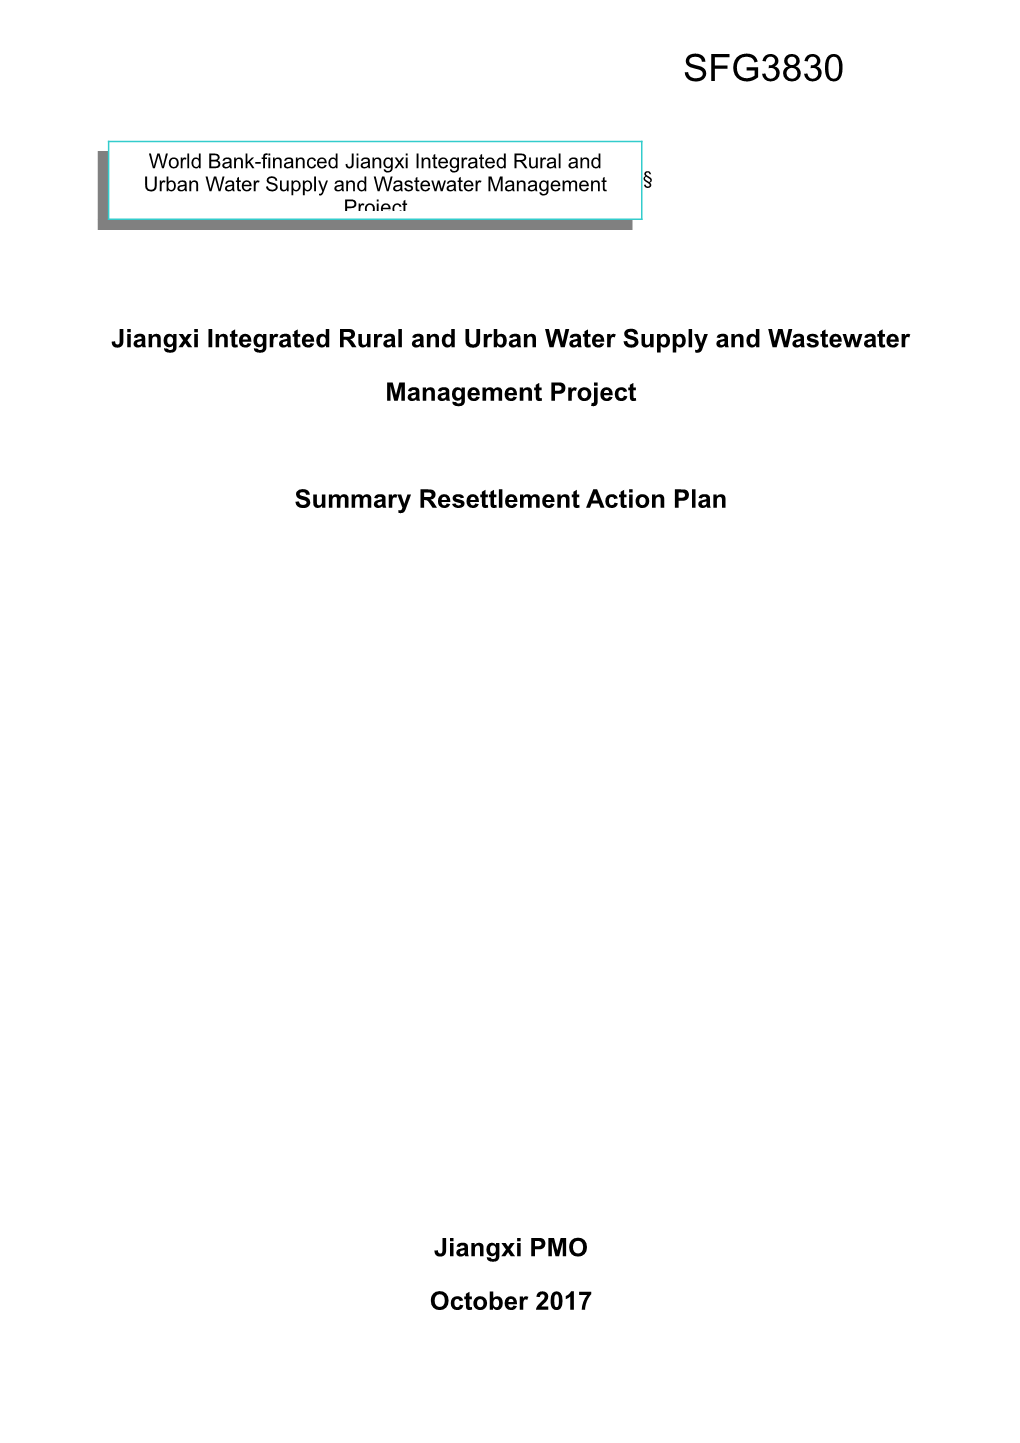 Jiangxi Integrated Rural and Urban Water Supply and Wastewater Management Project